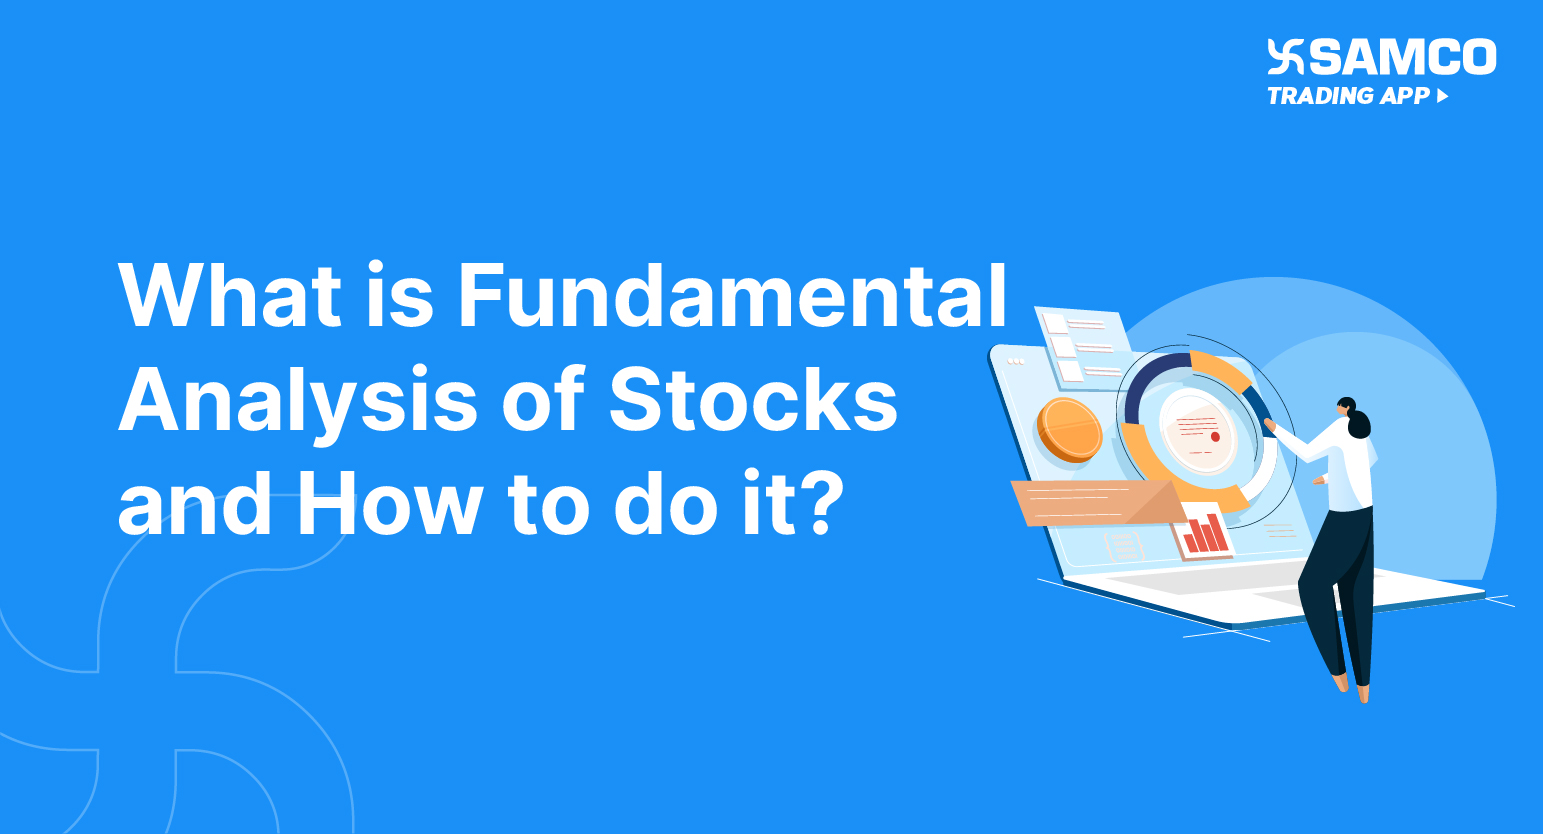 What is Fundamental Analysis of Stocks and How to do it?